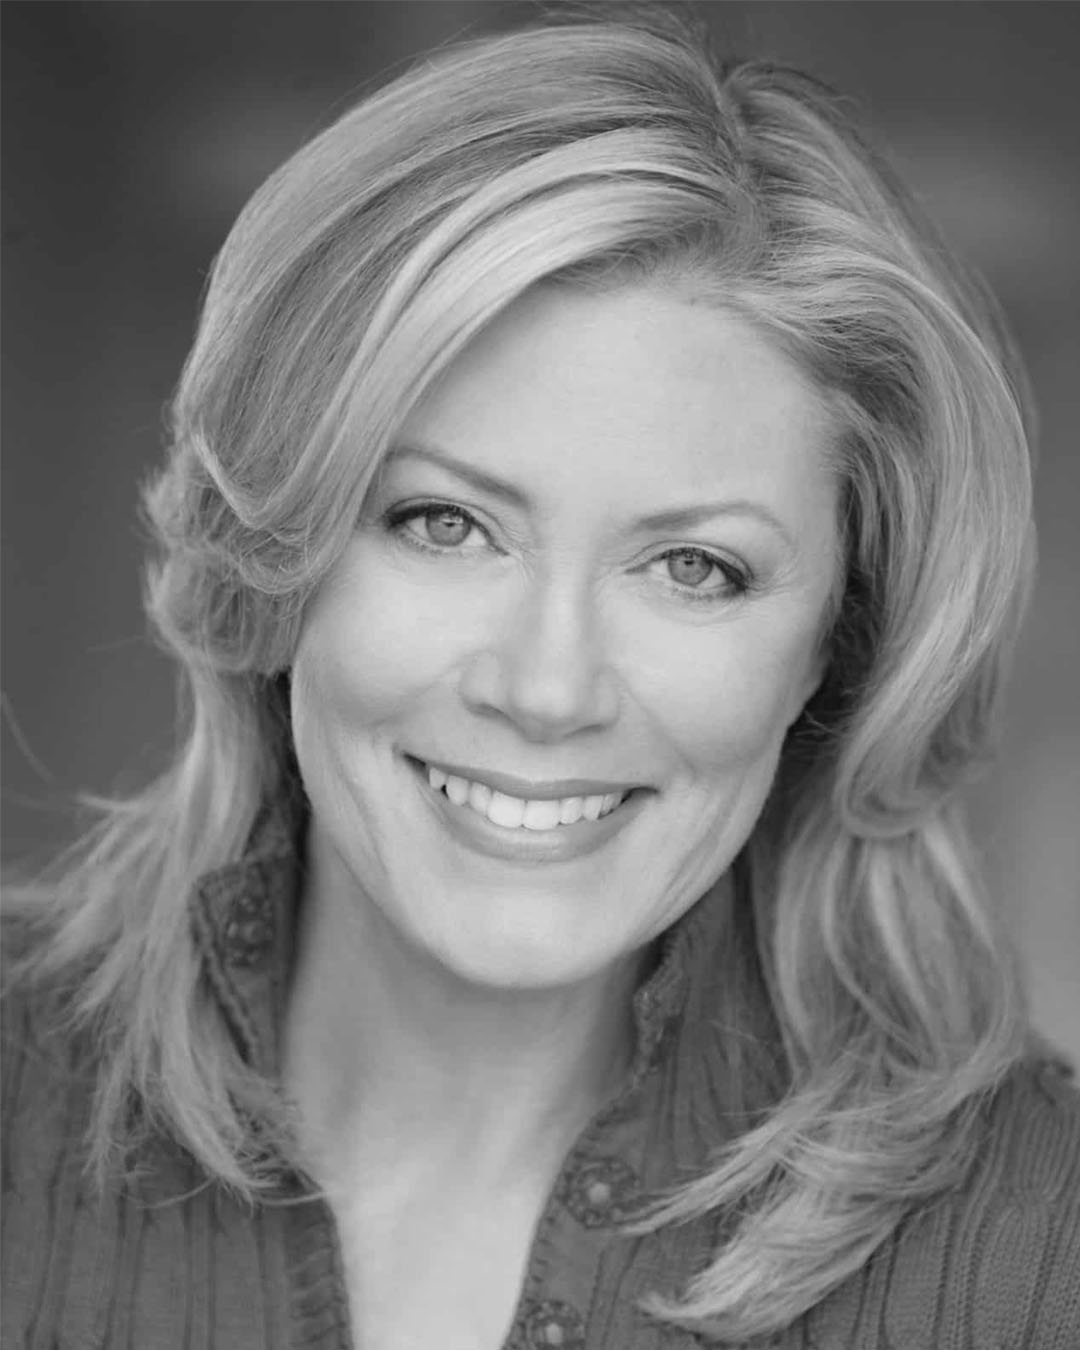 Headshot photo of Nancy Stafford, Actress and member of the Board of Directors for The Greenhouse Arts & Media Inc.